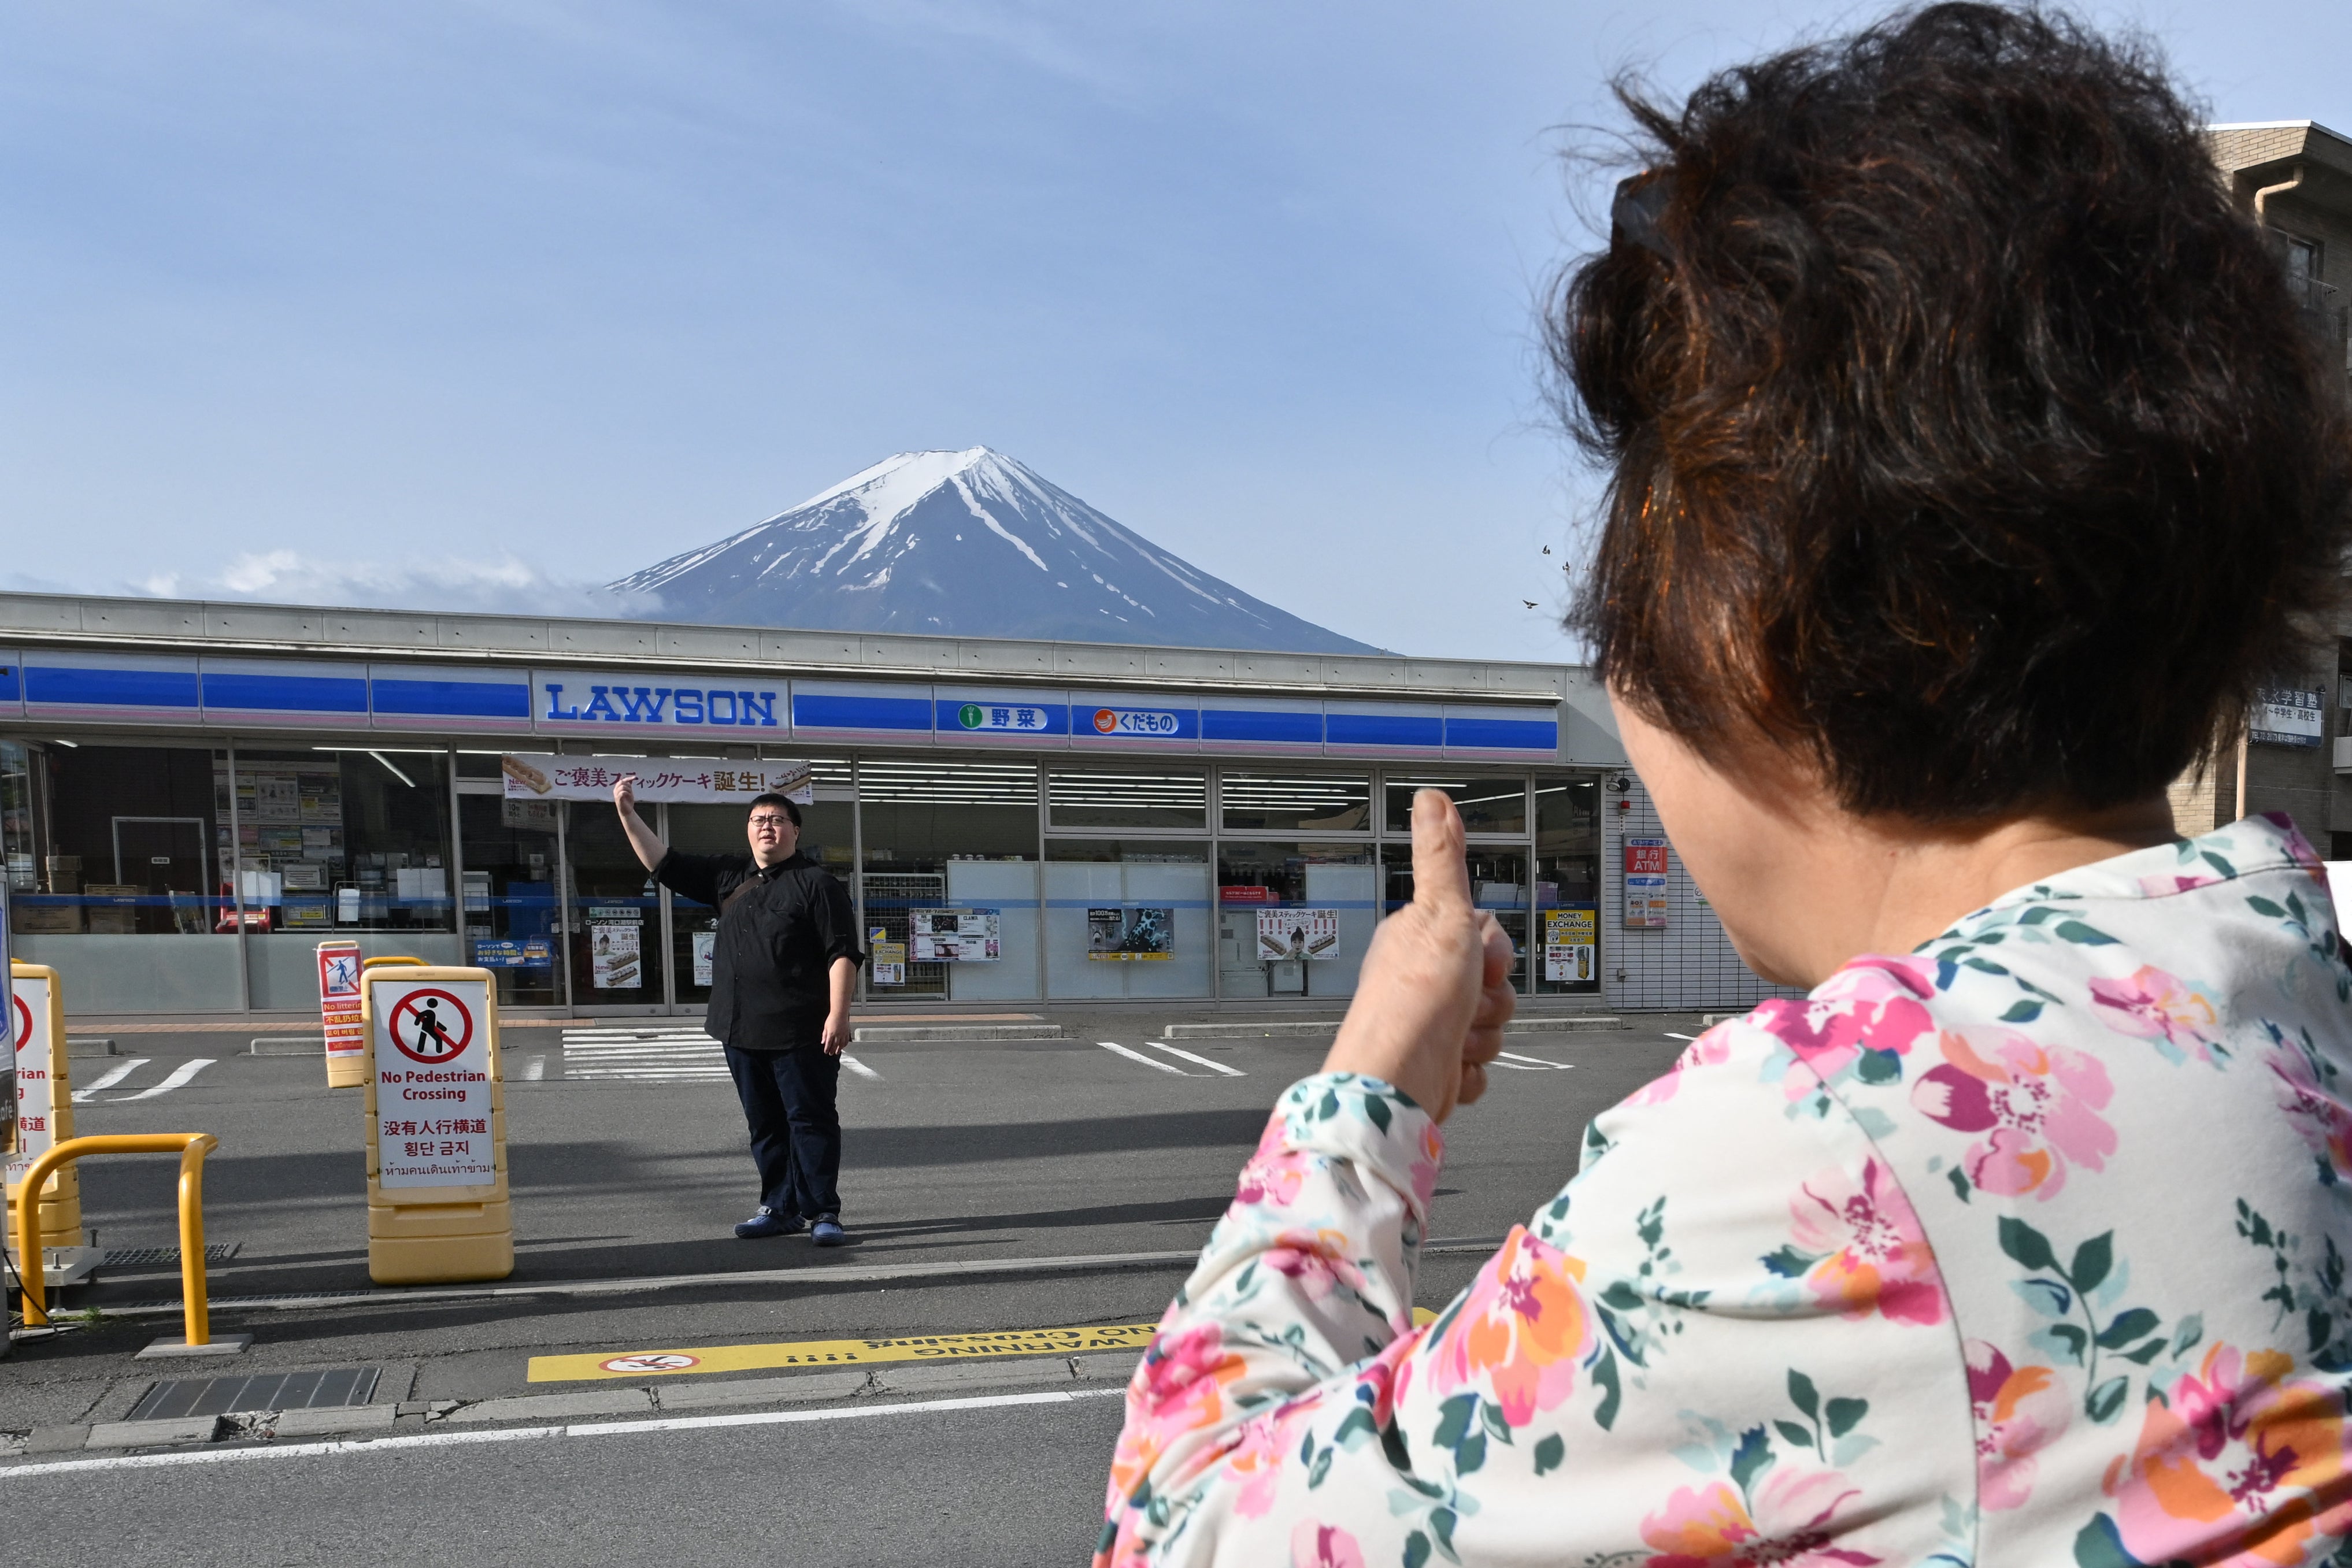 A person takes pictures of Mount Fuji from across the street of a convenience store, hours before the installation of a barrier